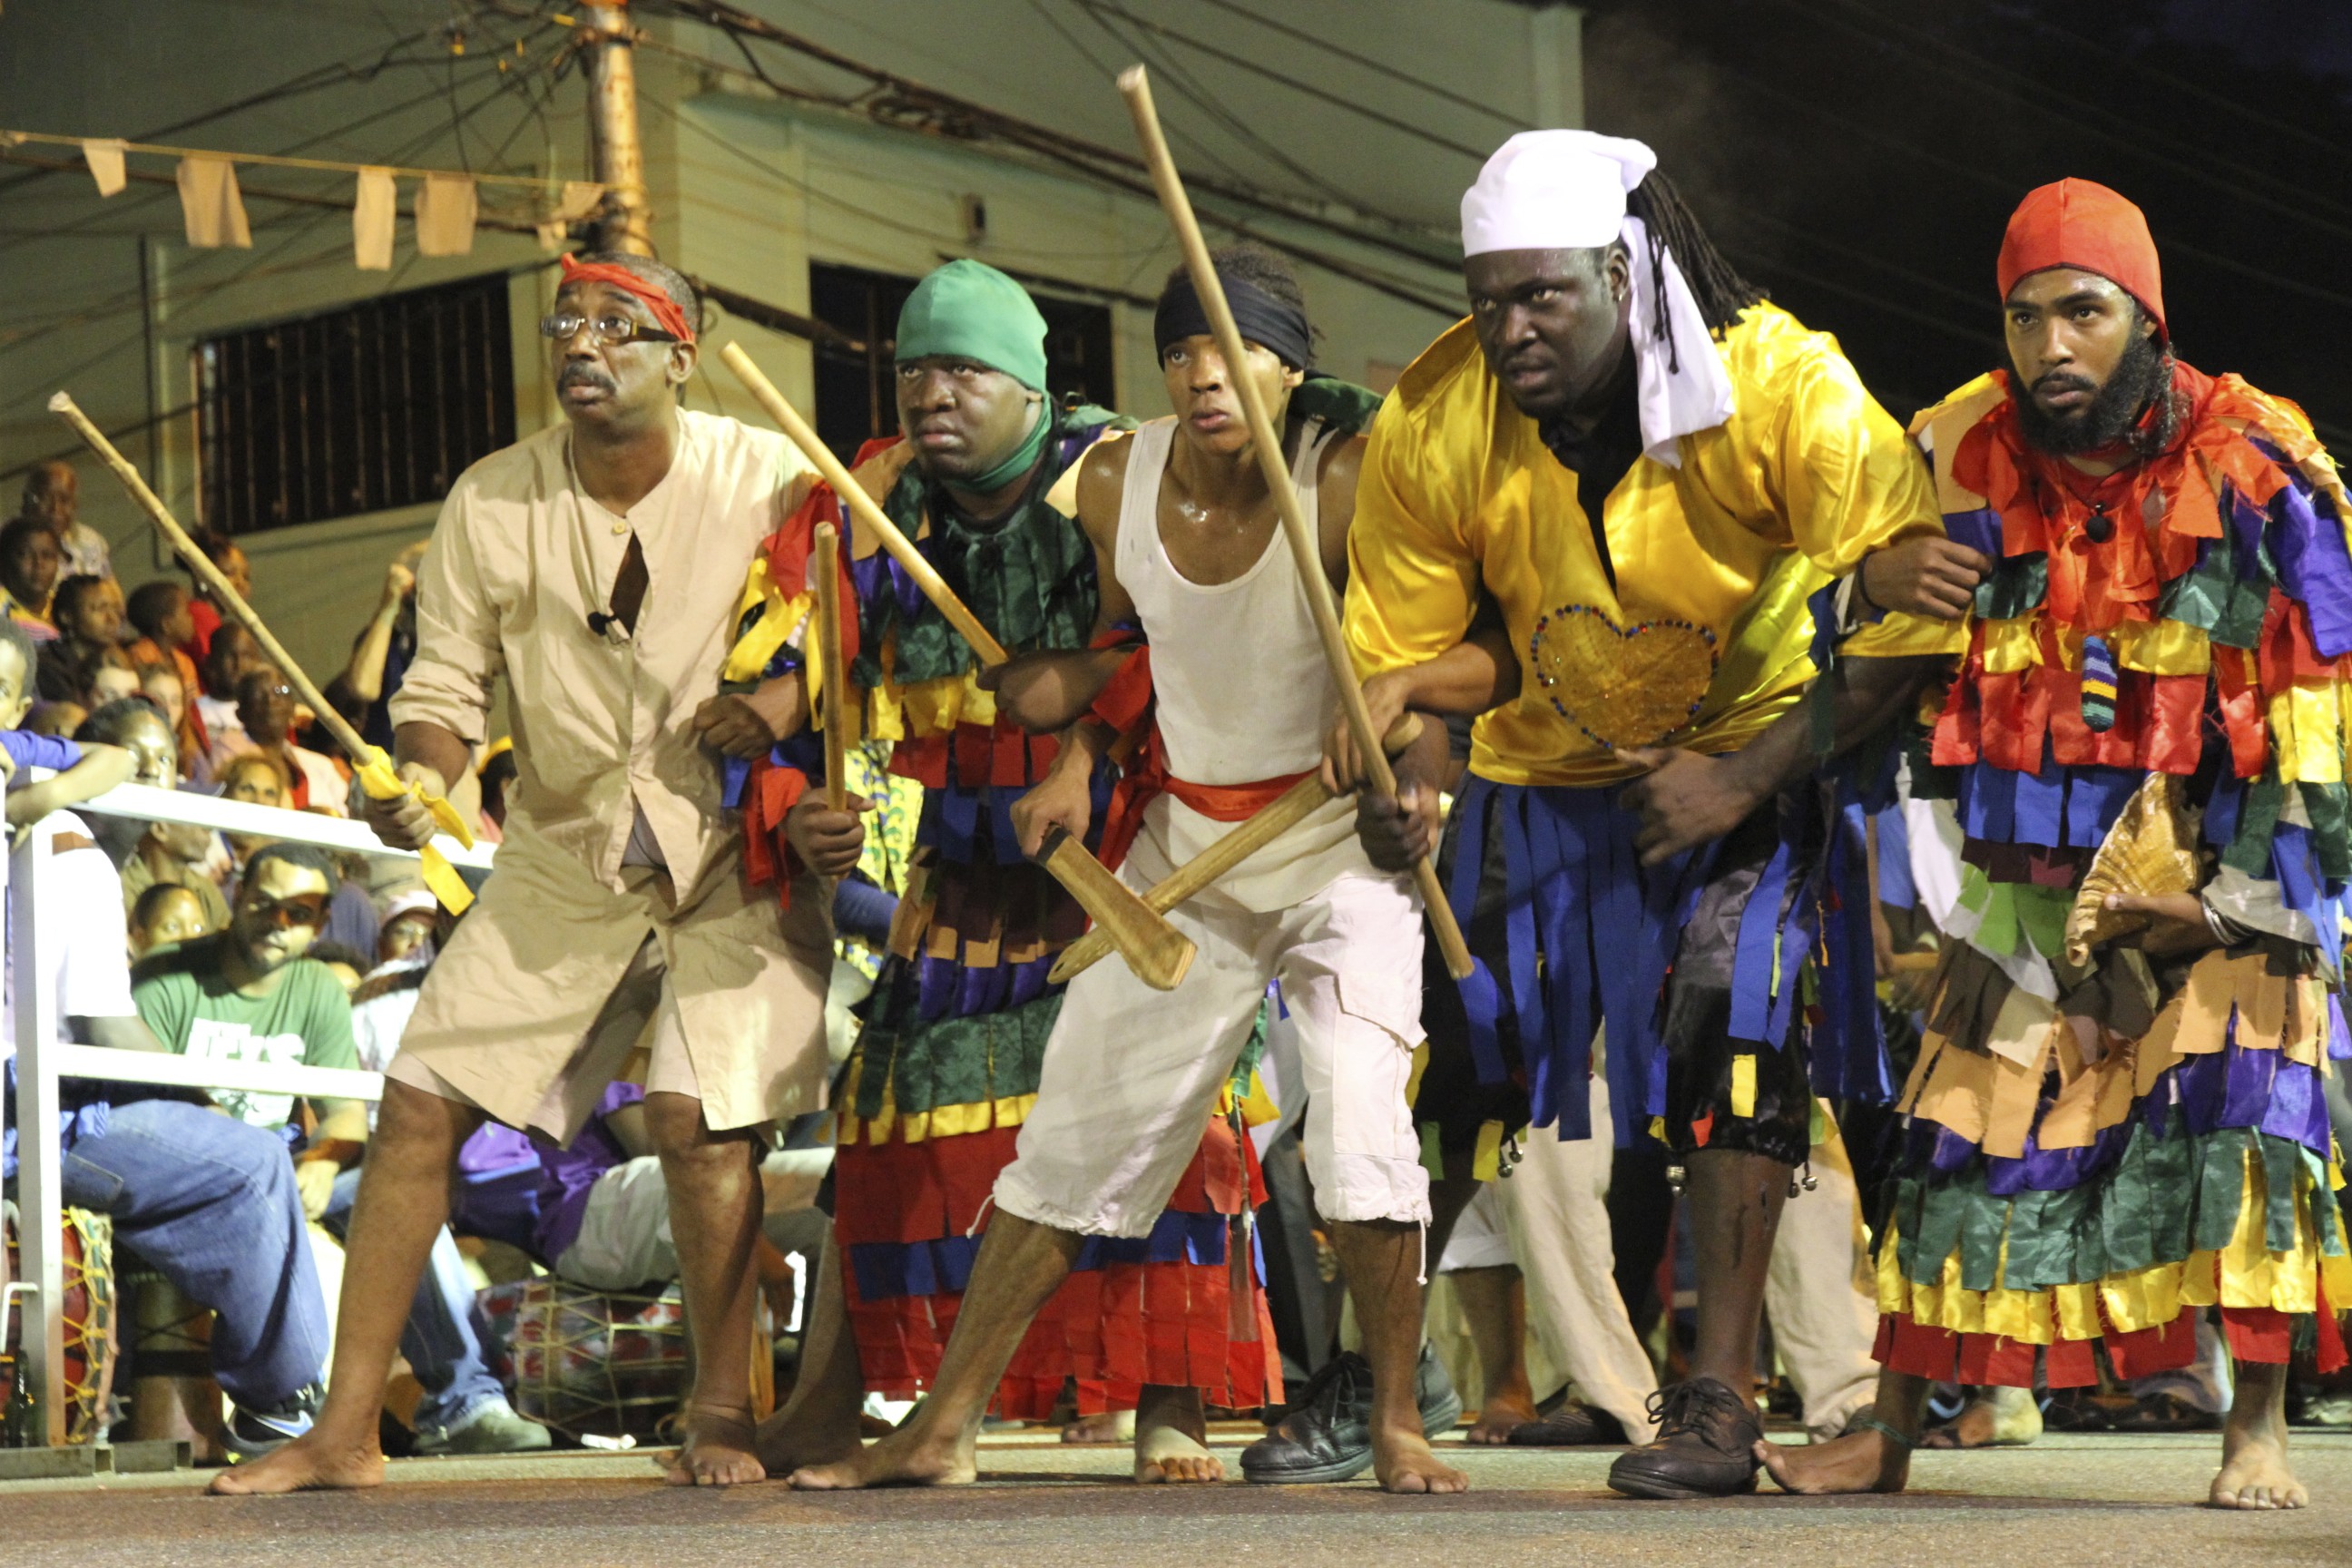 Kambule!: Preserving Carnival's History in Trinidad - LargeUp2592 x 1728